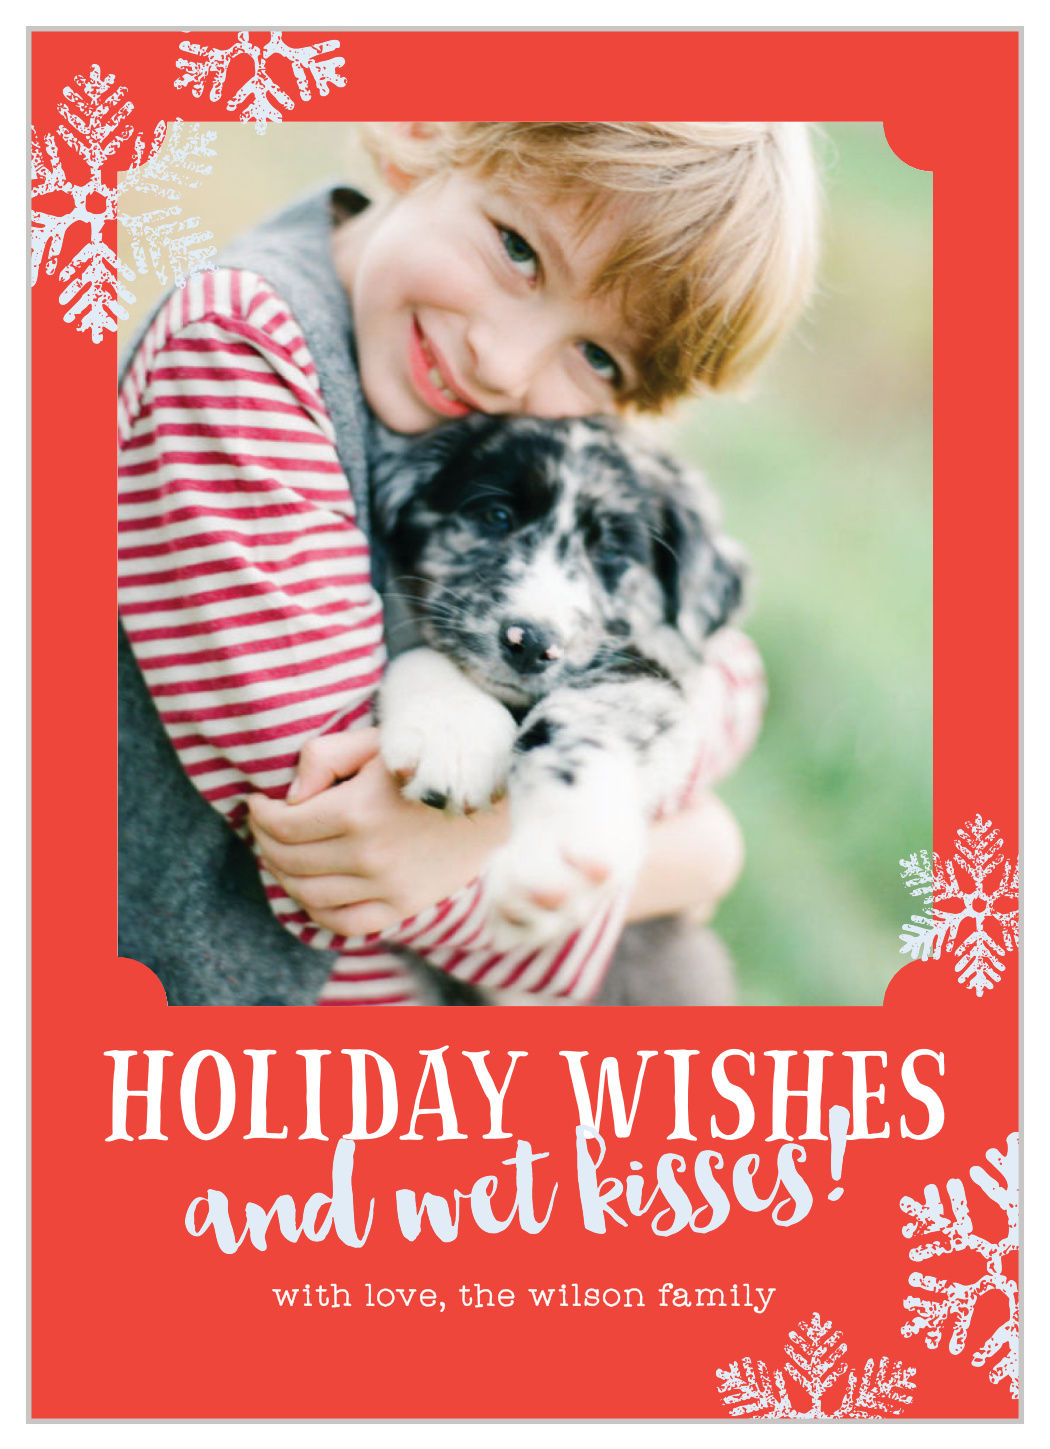 Wishes & Kisses Holiday Cards